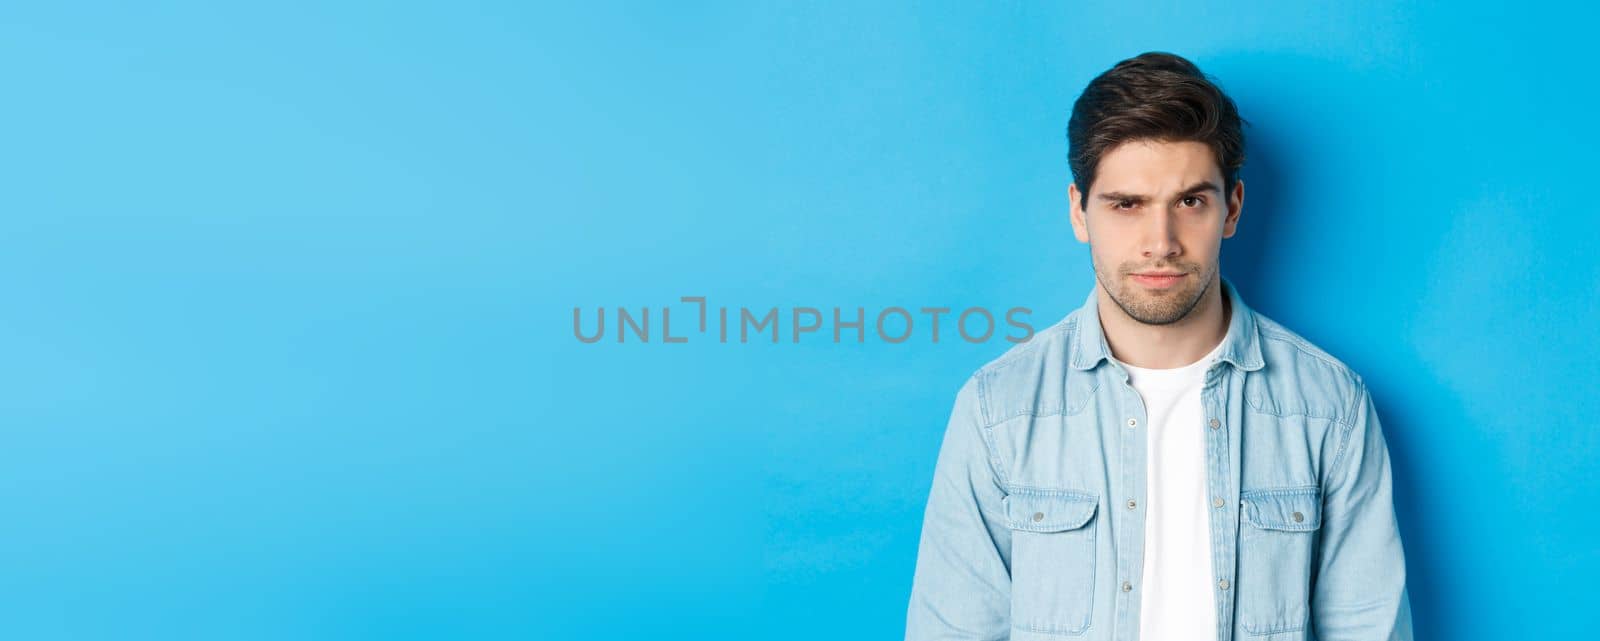 Close-up of suspicious and serious guy raising one eyebrow, looking at camera, standing against blue background.